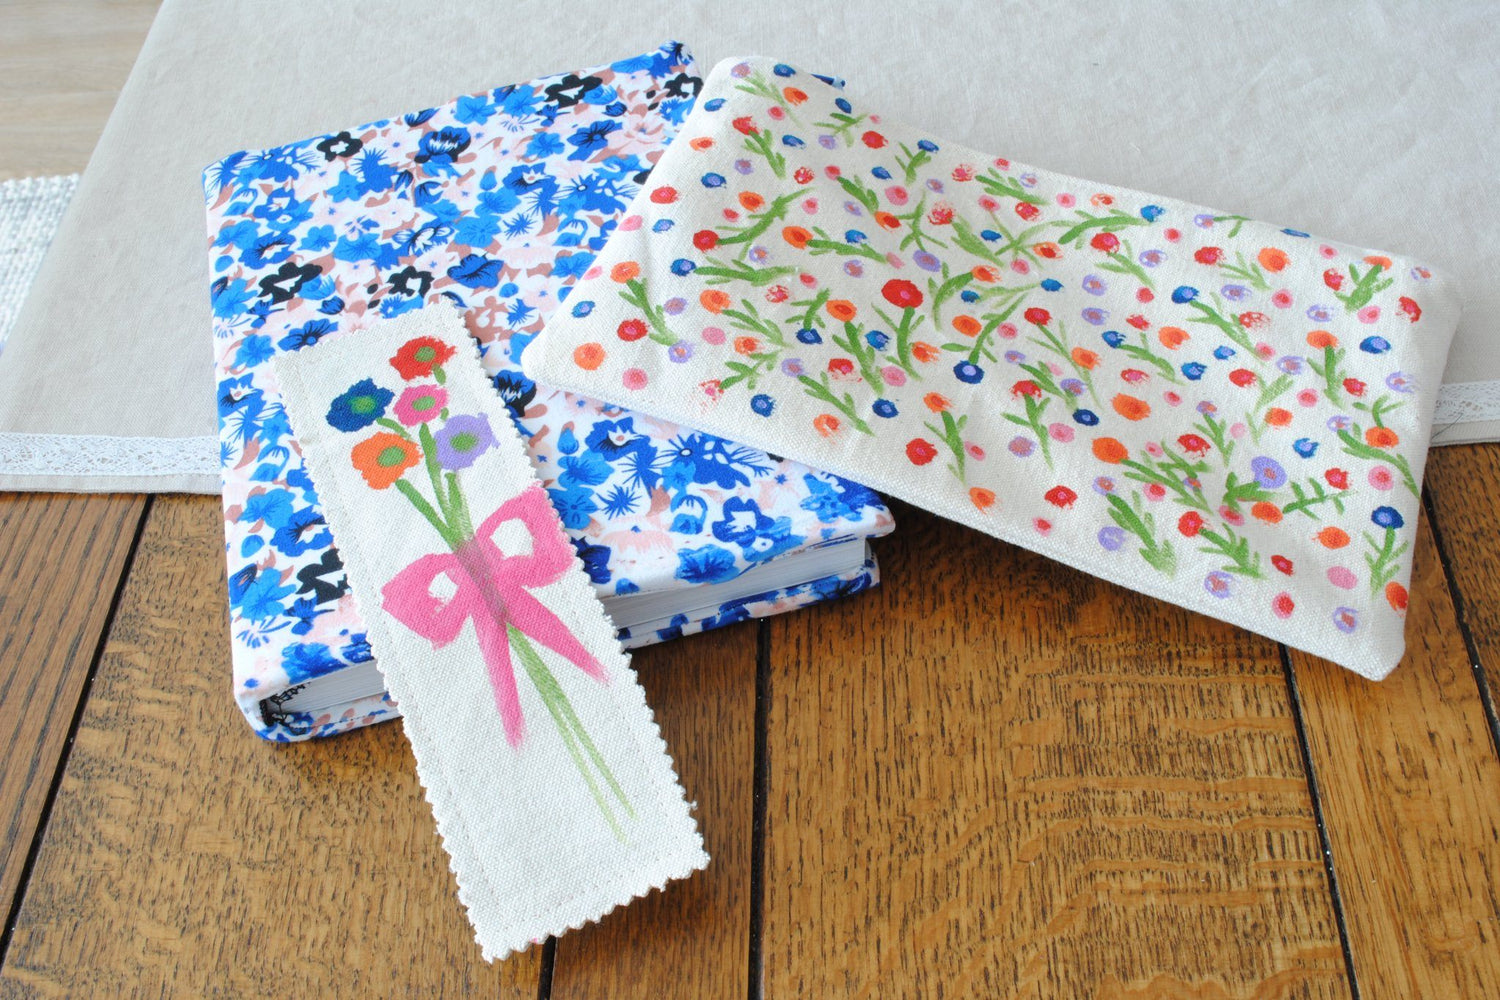 DIY Back to School Crafts Projects - Pencil Case, Book Sock and Book Mark